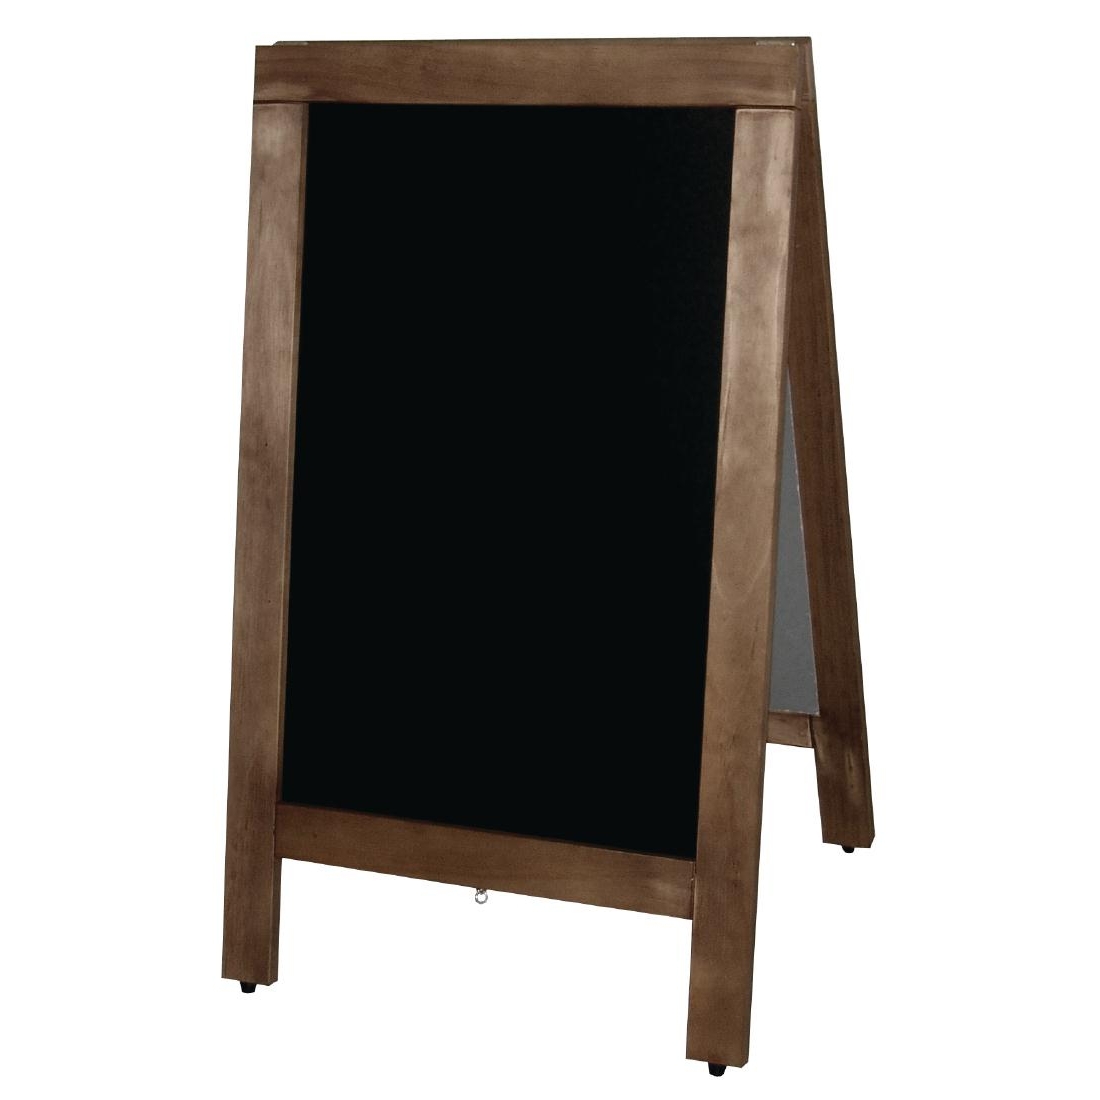 Olympia Pavement Board 850 x 500mm Wood Framed